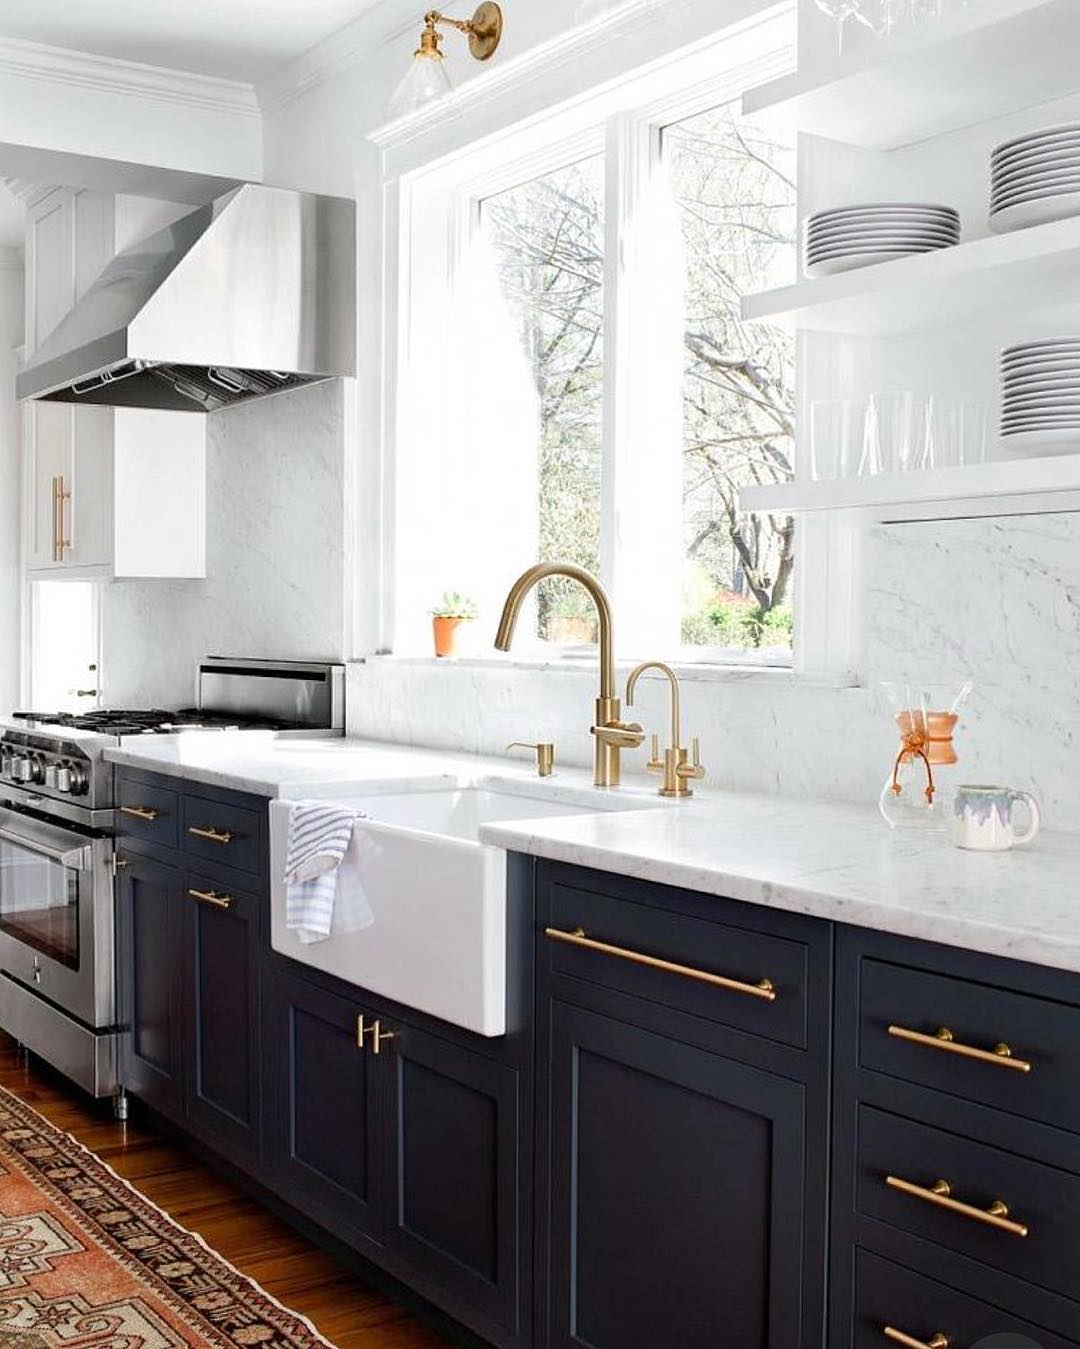 A kitchen countertop with charcoal gray cabinets and gold hardware for cabinet pulls and faucet is shown in picture. Photo by Instagram username @hadiyahlove